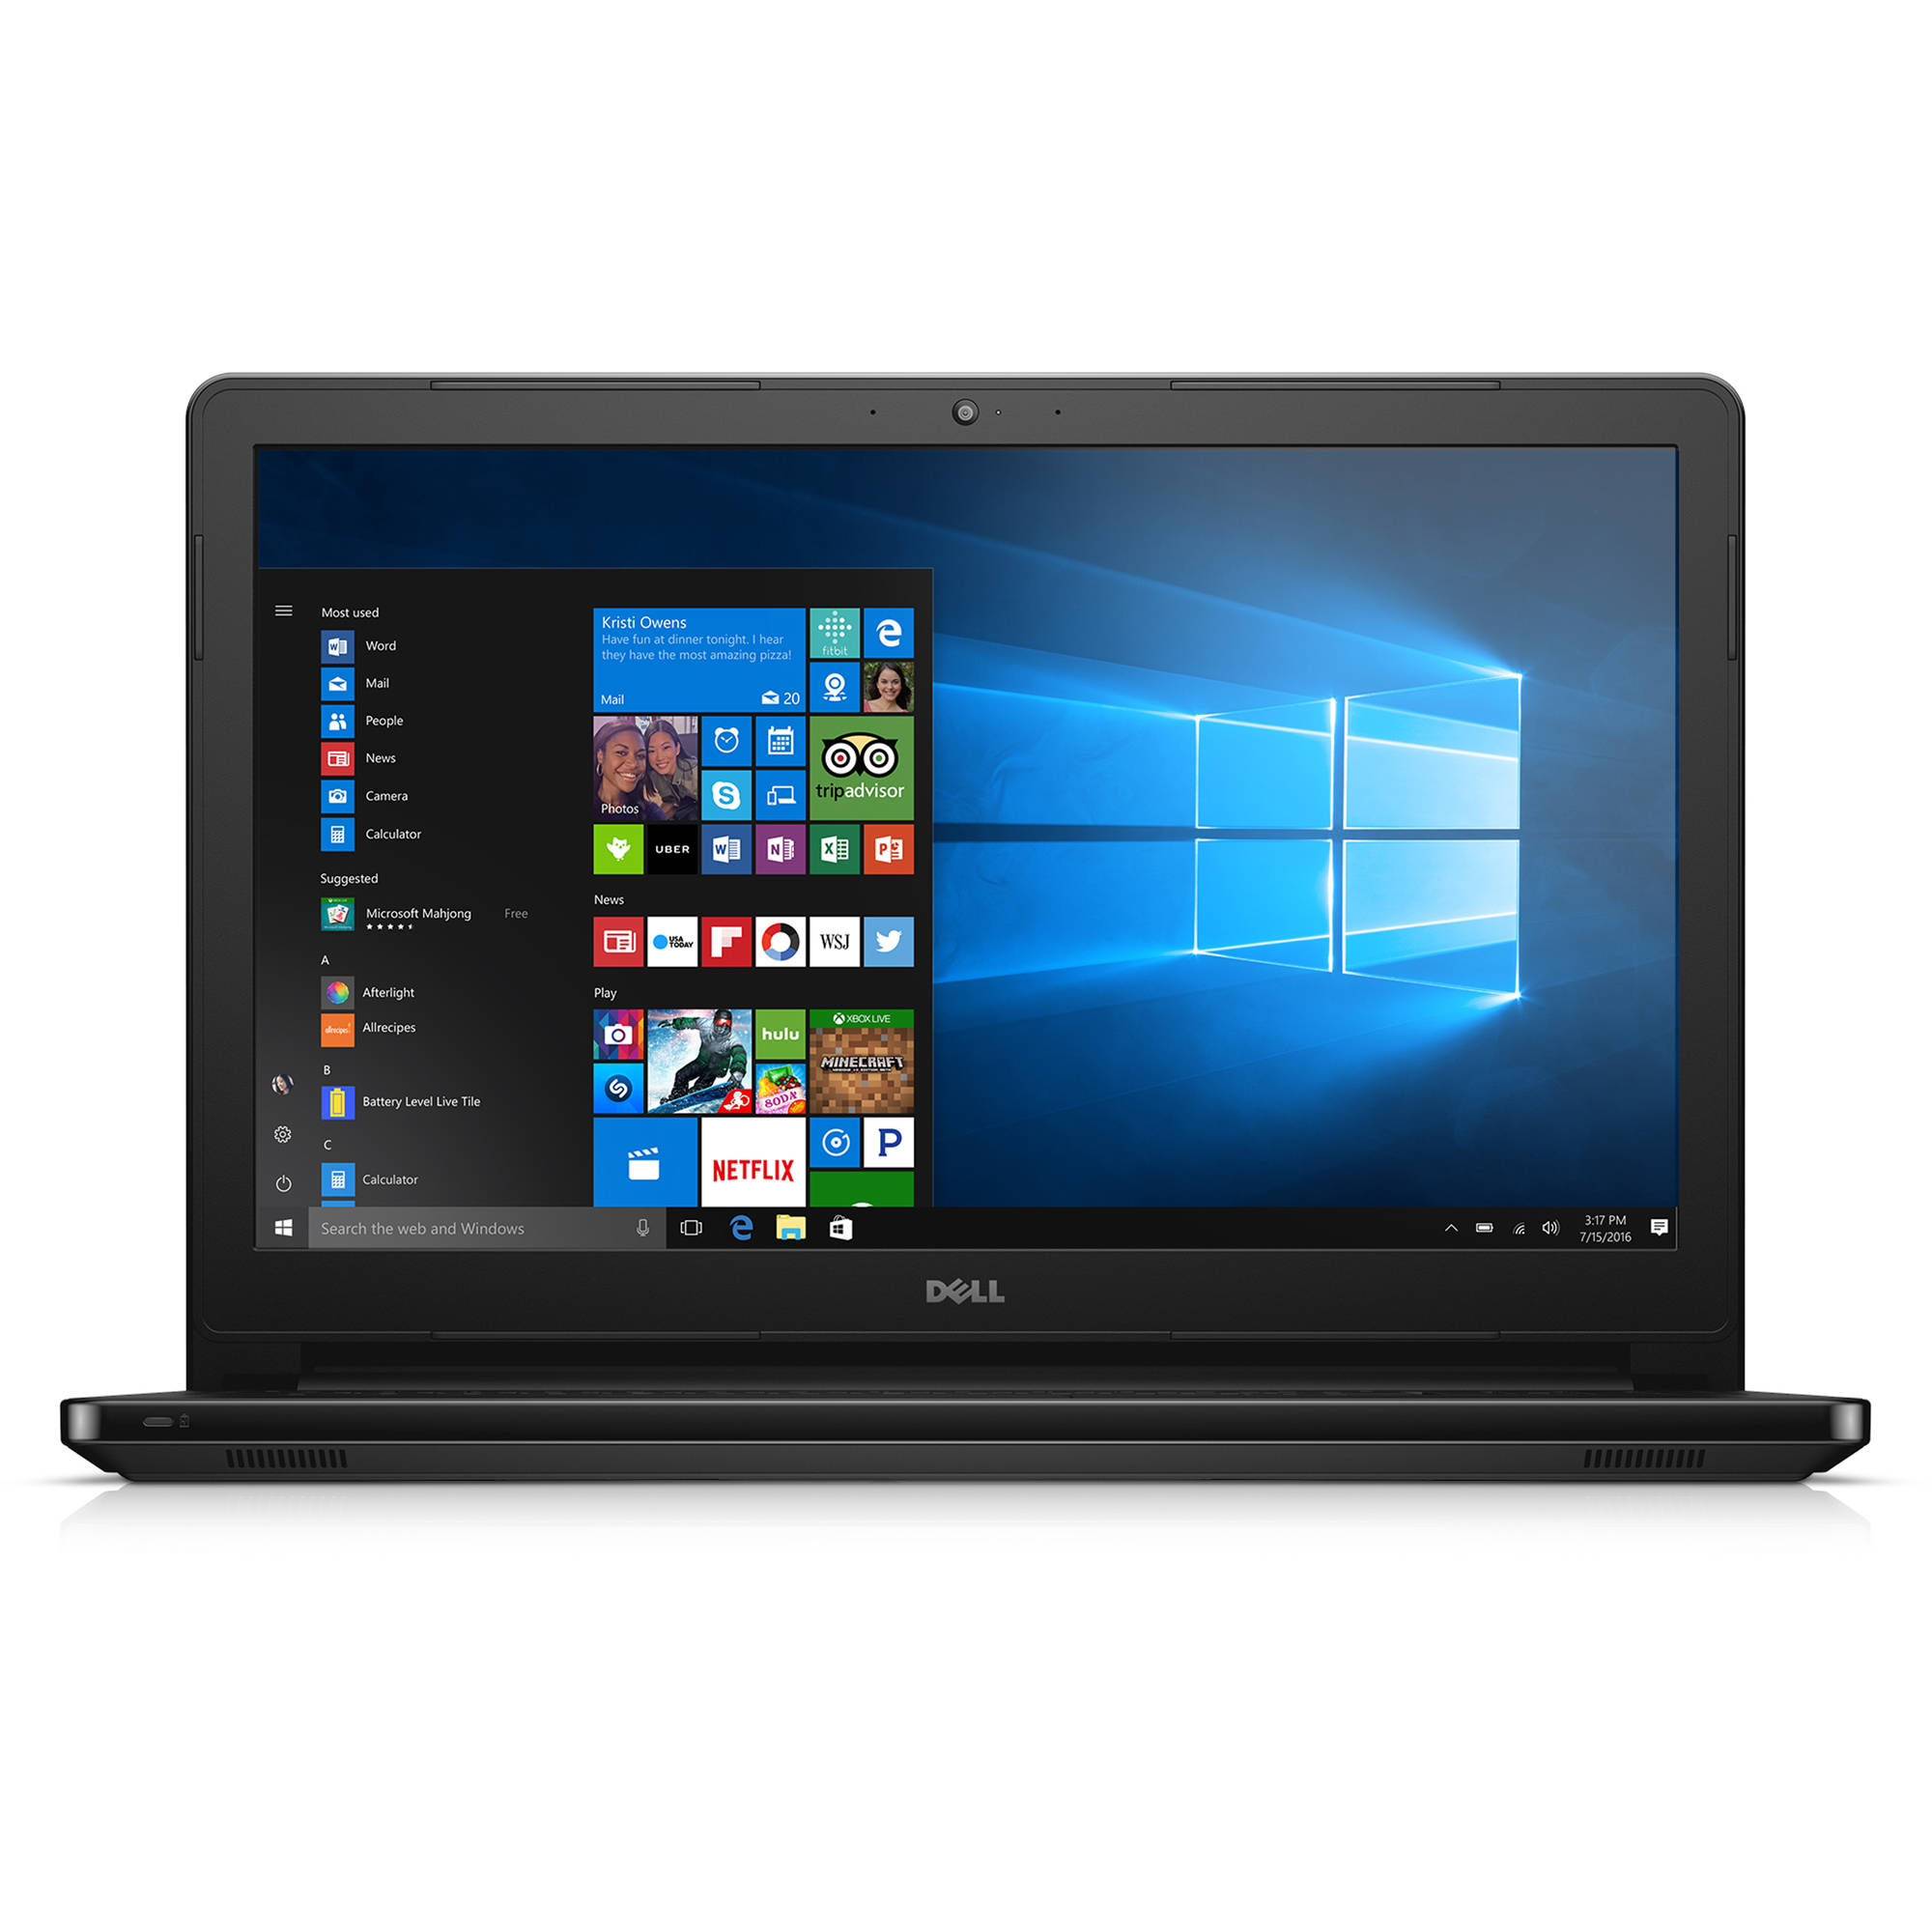 Dell Inspiron 15 5543 Notebook